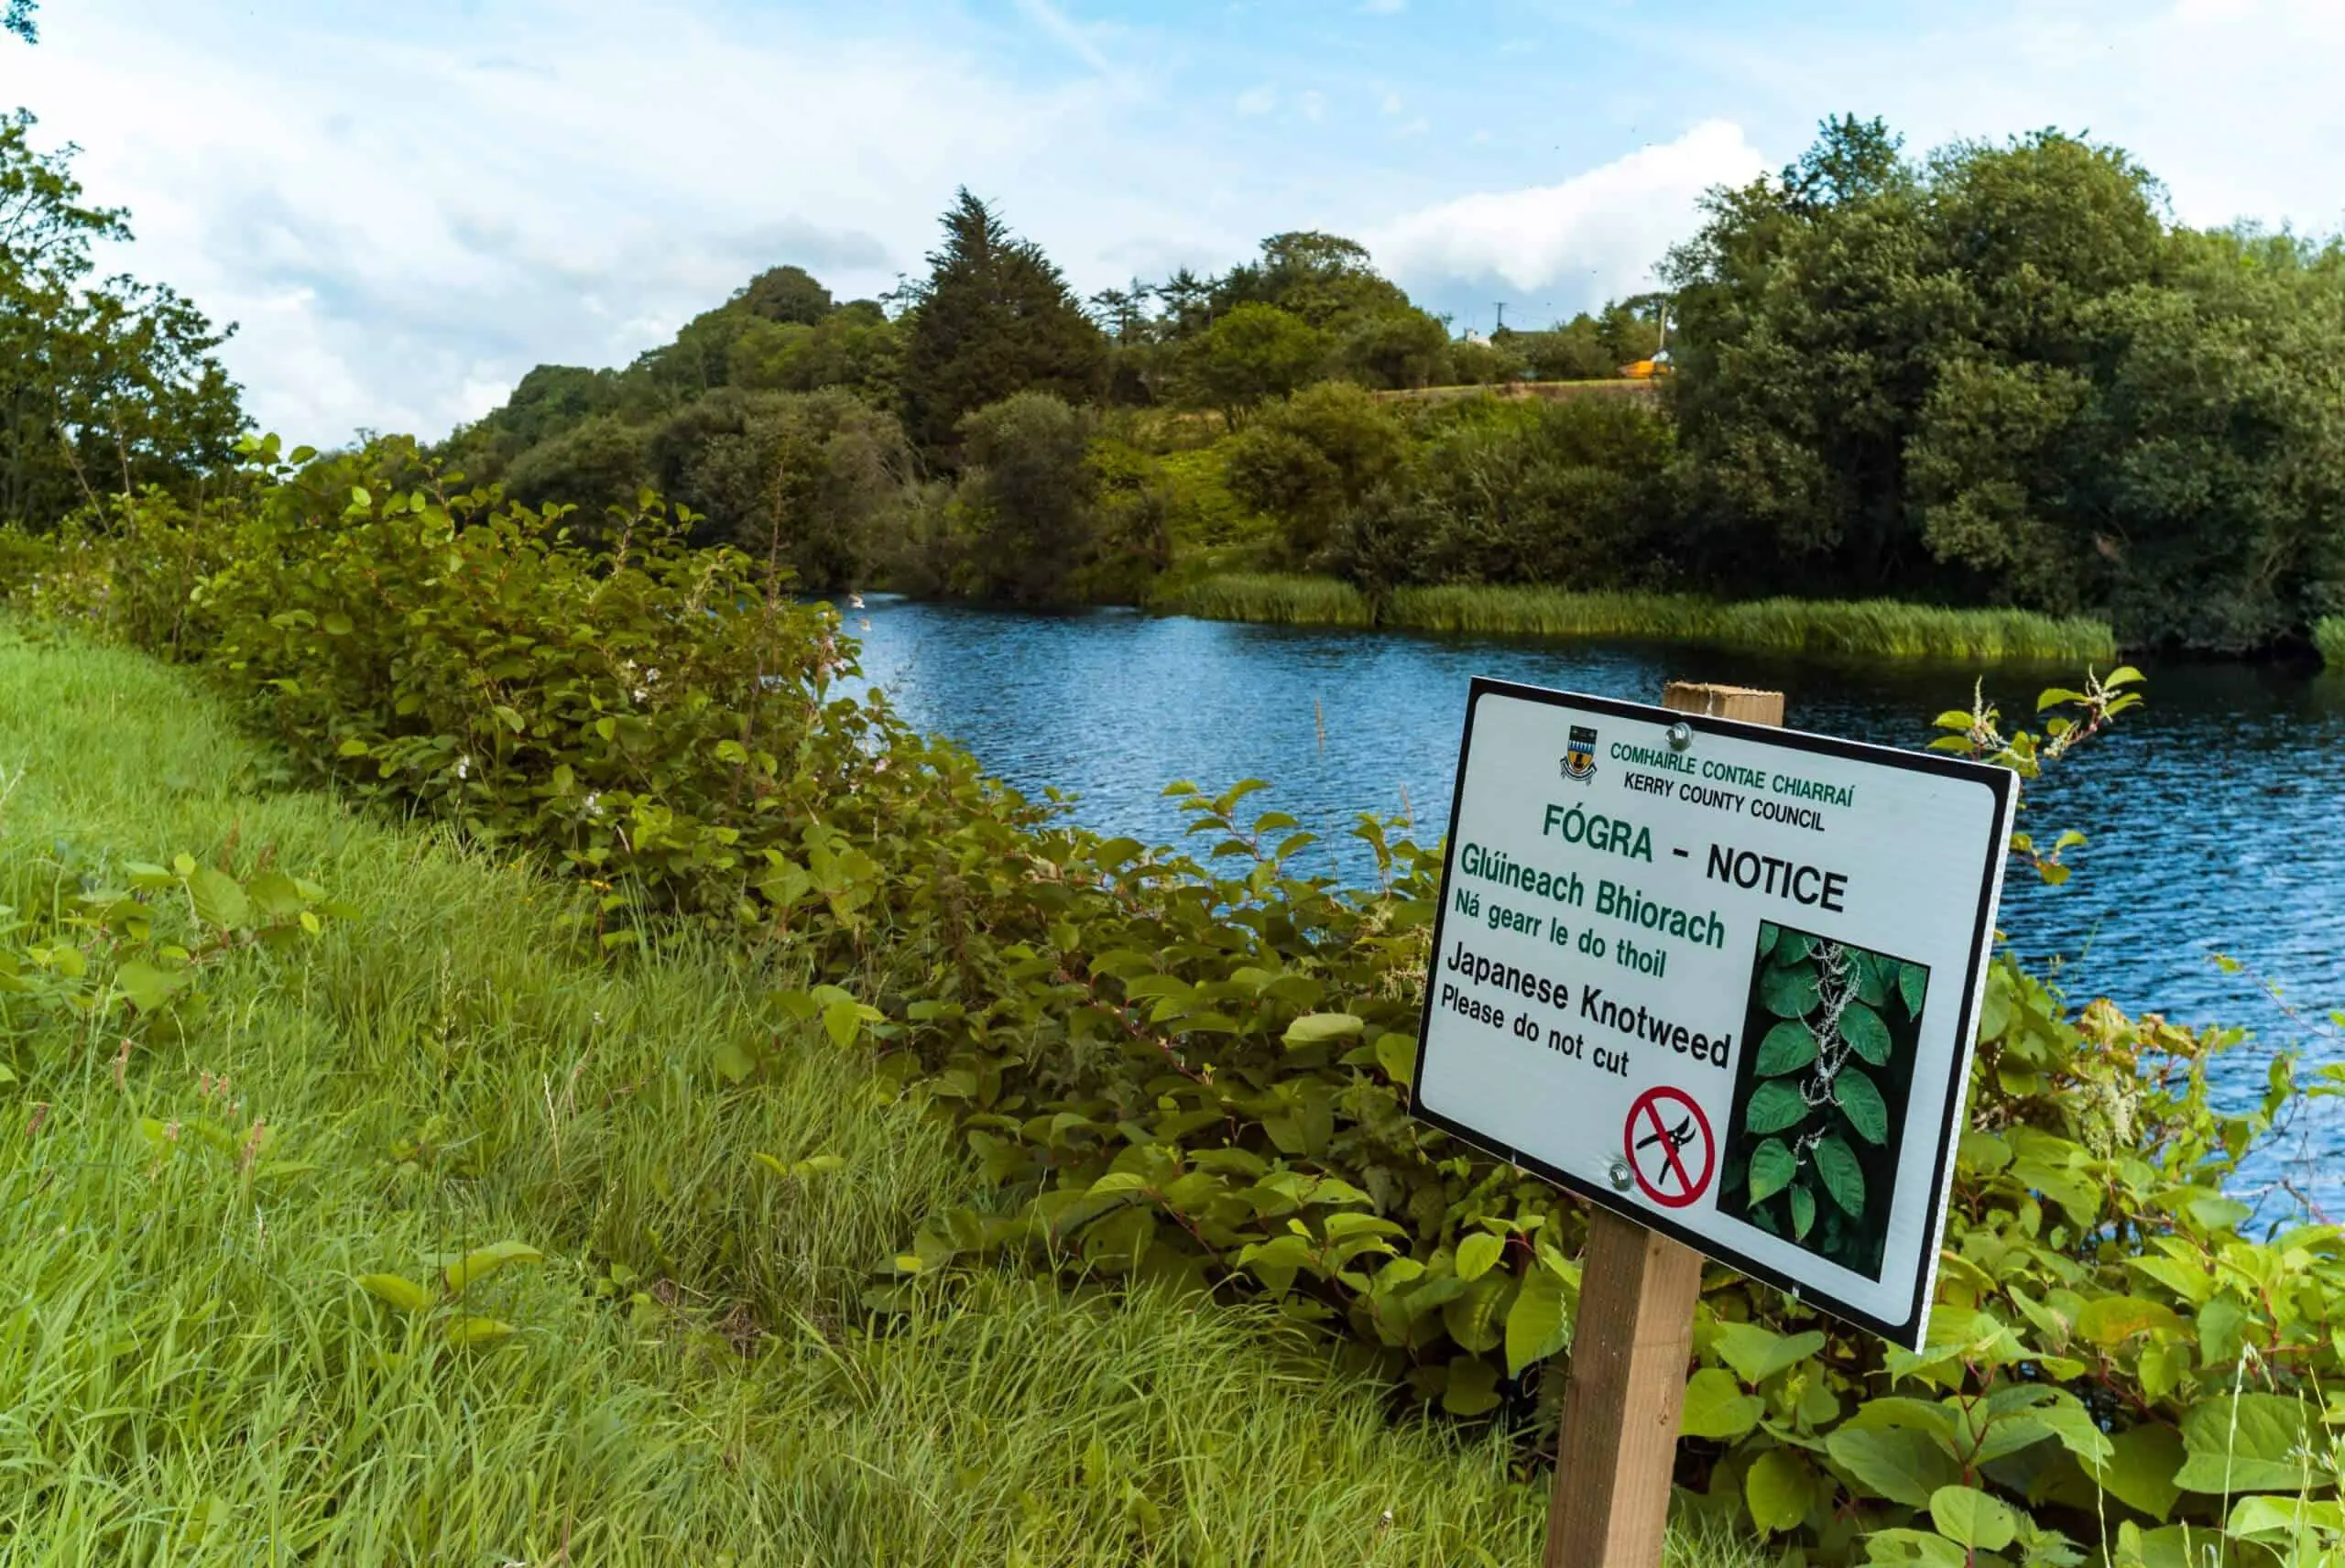 Waterways suffer from this invasive weed scaled